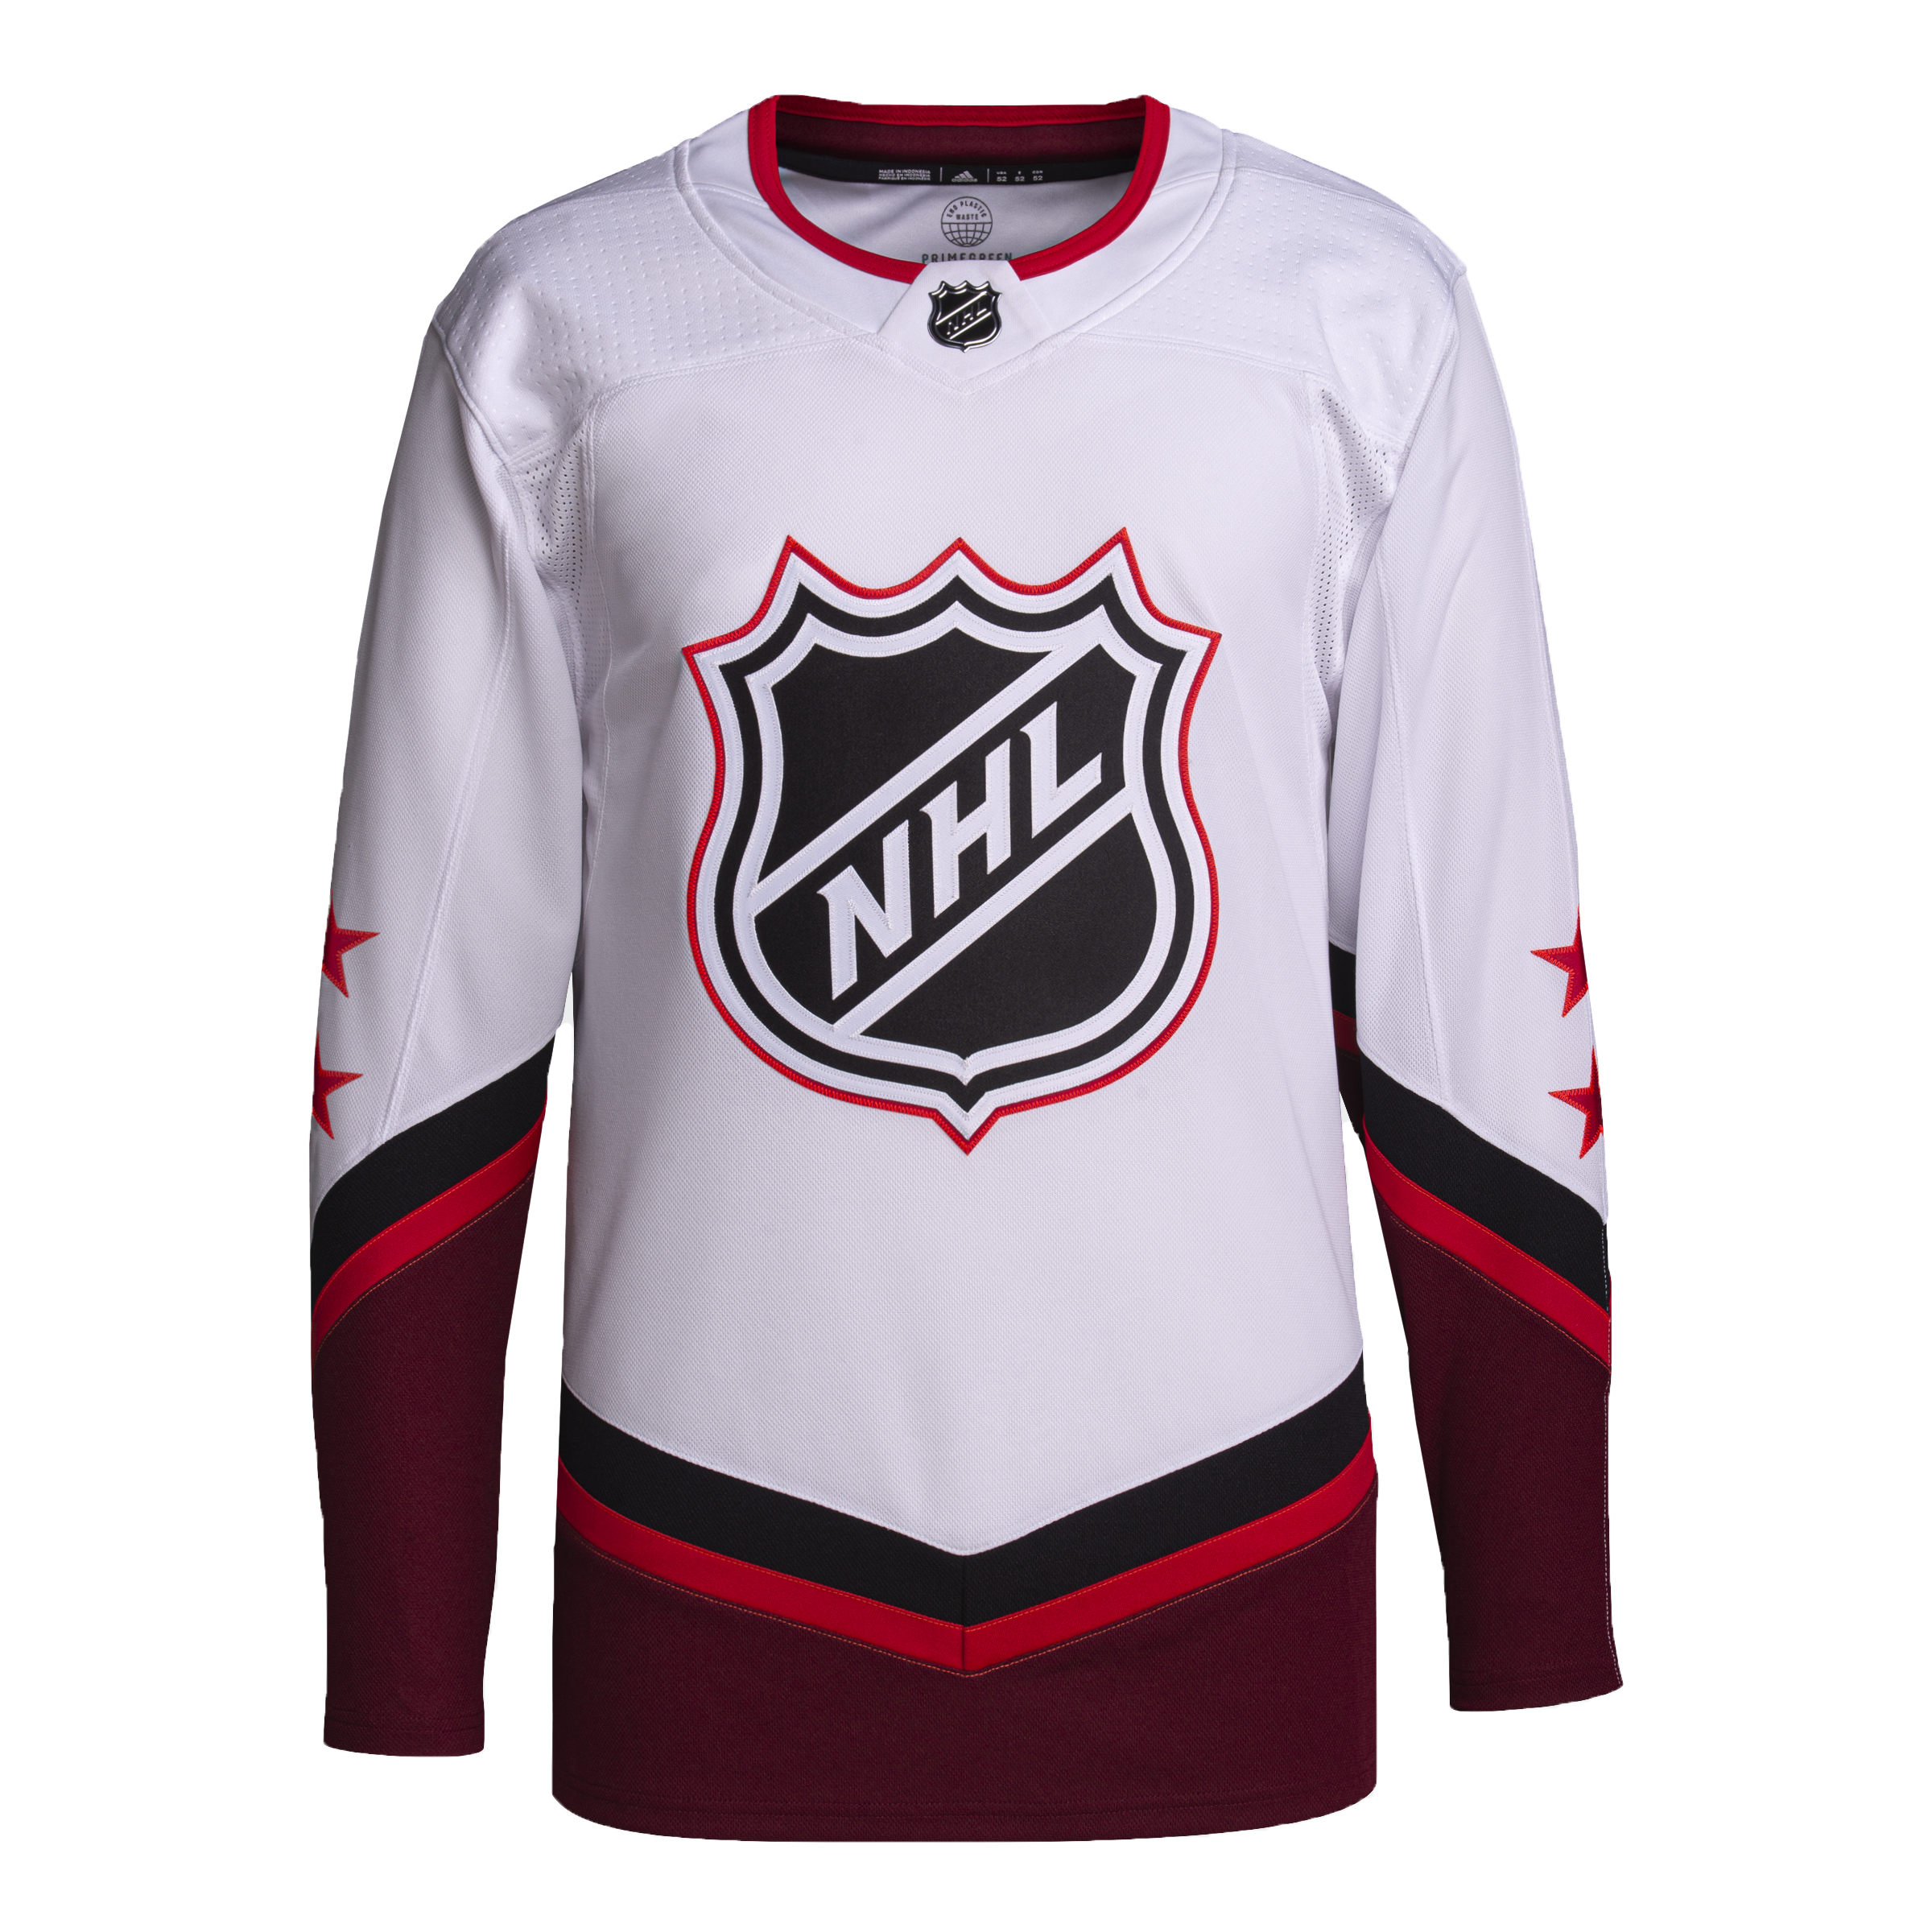 2022 NHL All-Star Game White Authentic Jersey